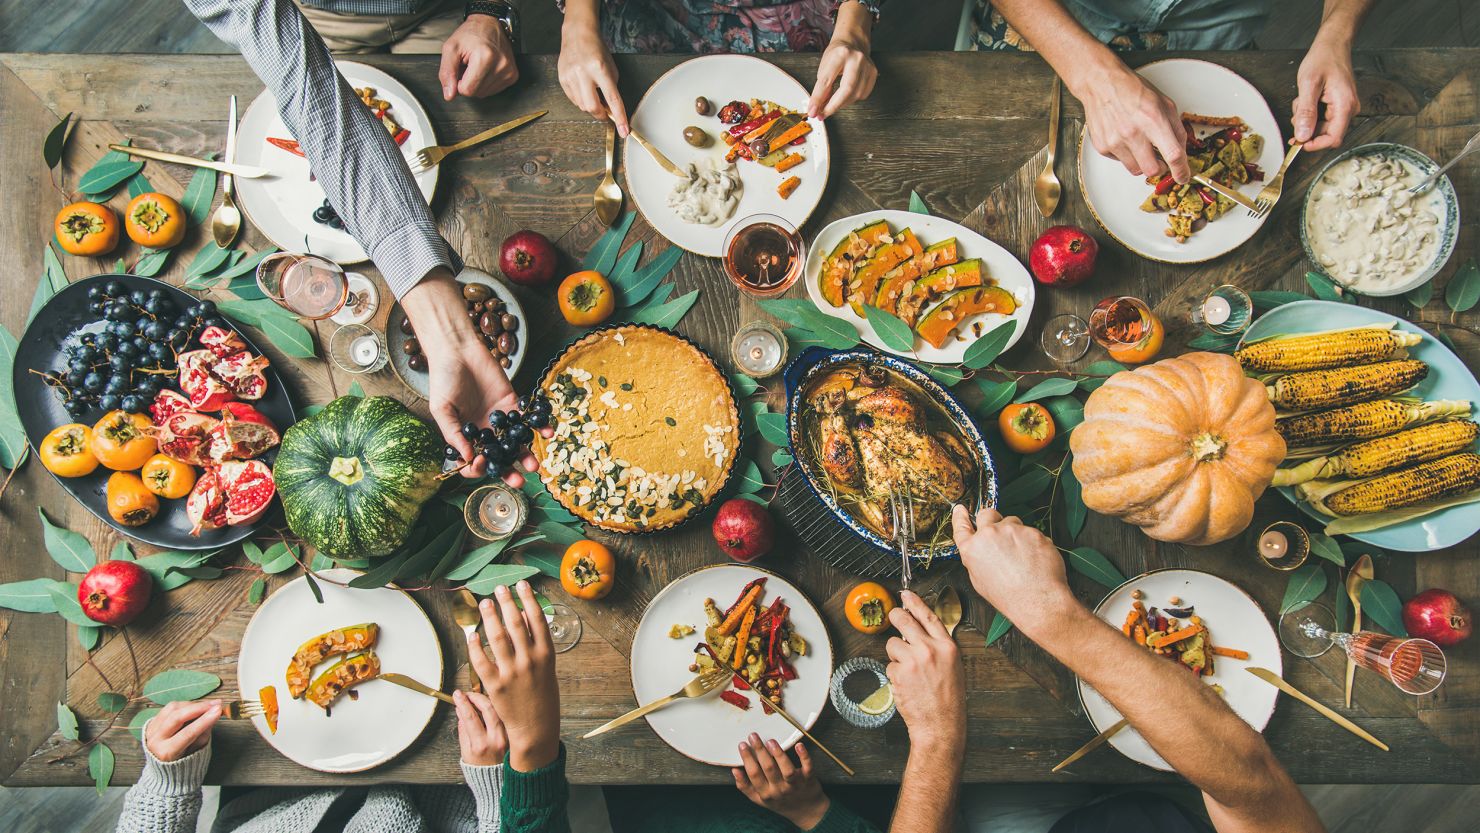 Ten years ago, Friendsgiving was a holiday tradition few had heard of. Now, it's seemingly everywhere. 